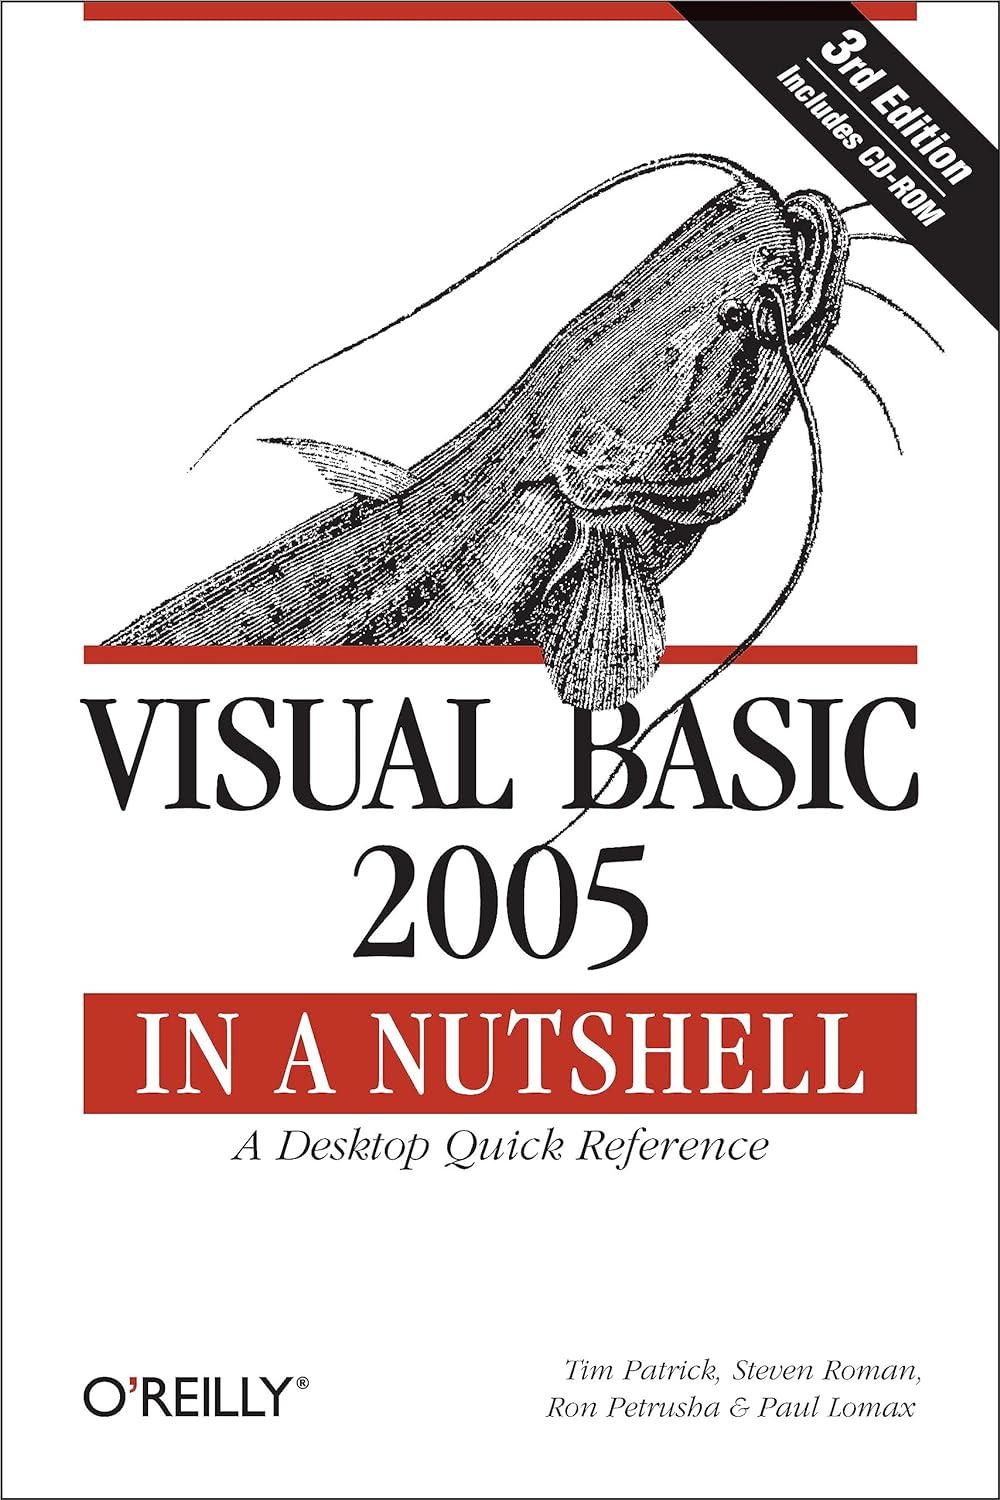 visual basic 2005 in a nutshell a desktop quick reference 3rd edition tim patrick, steven roman, ron